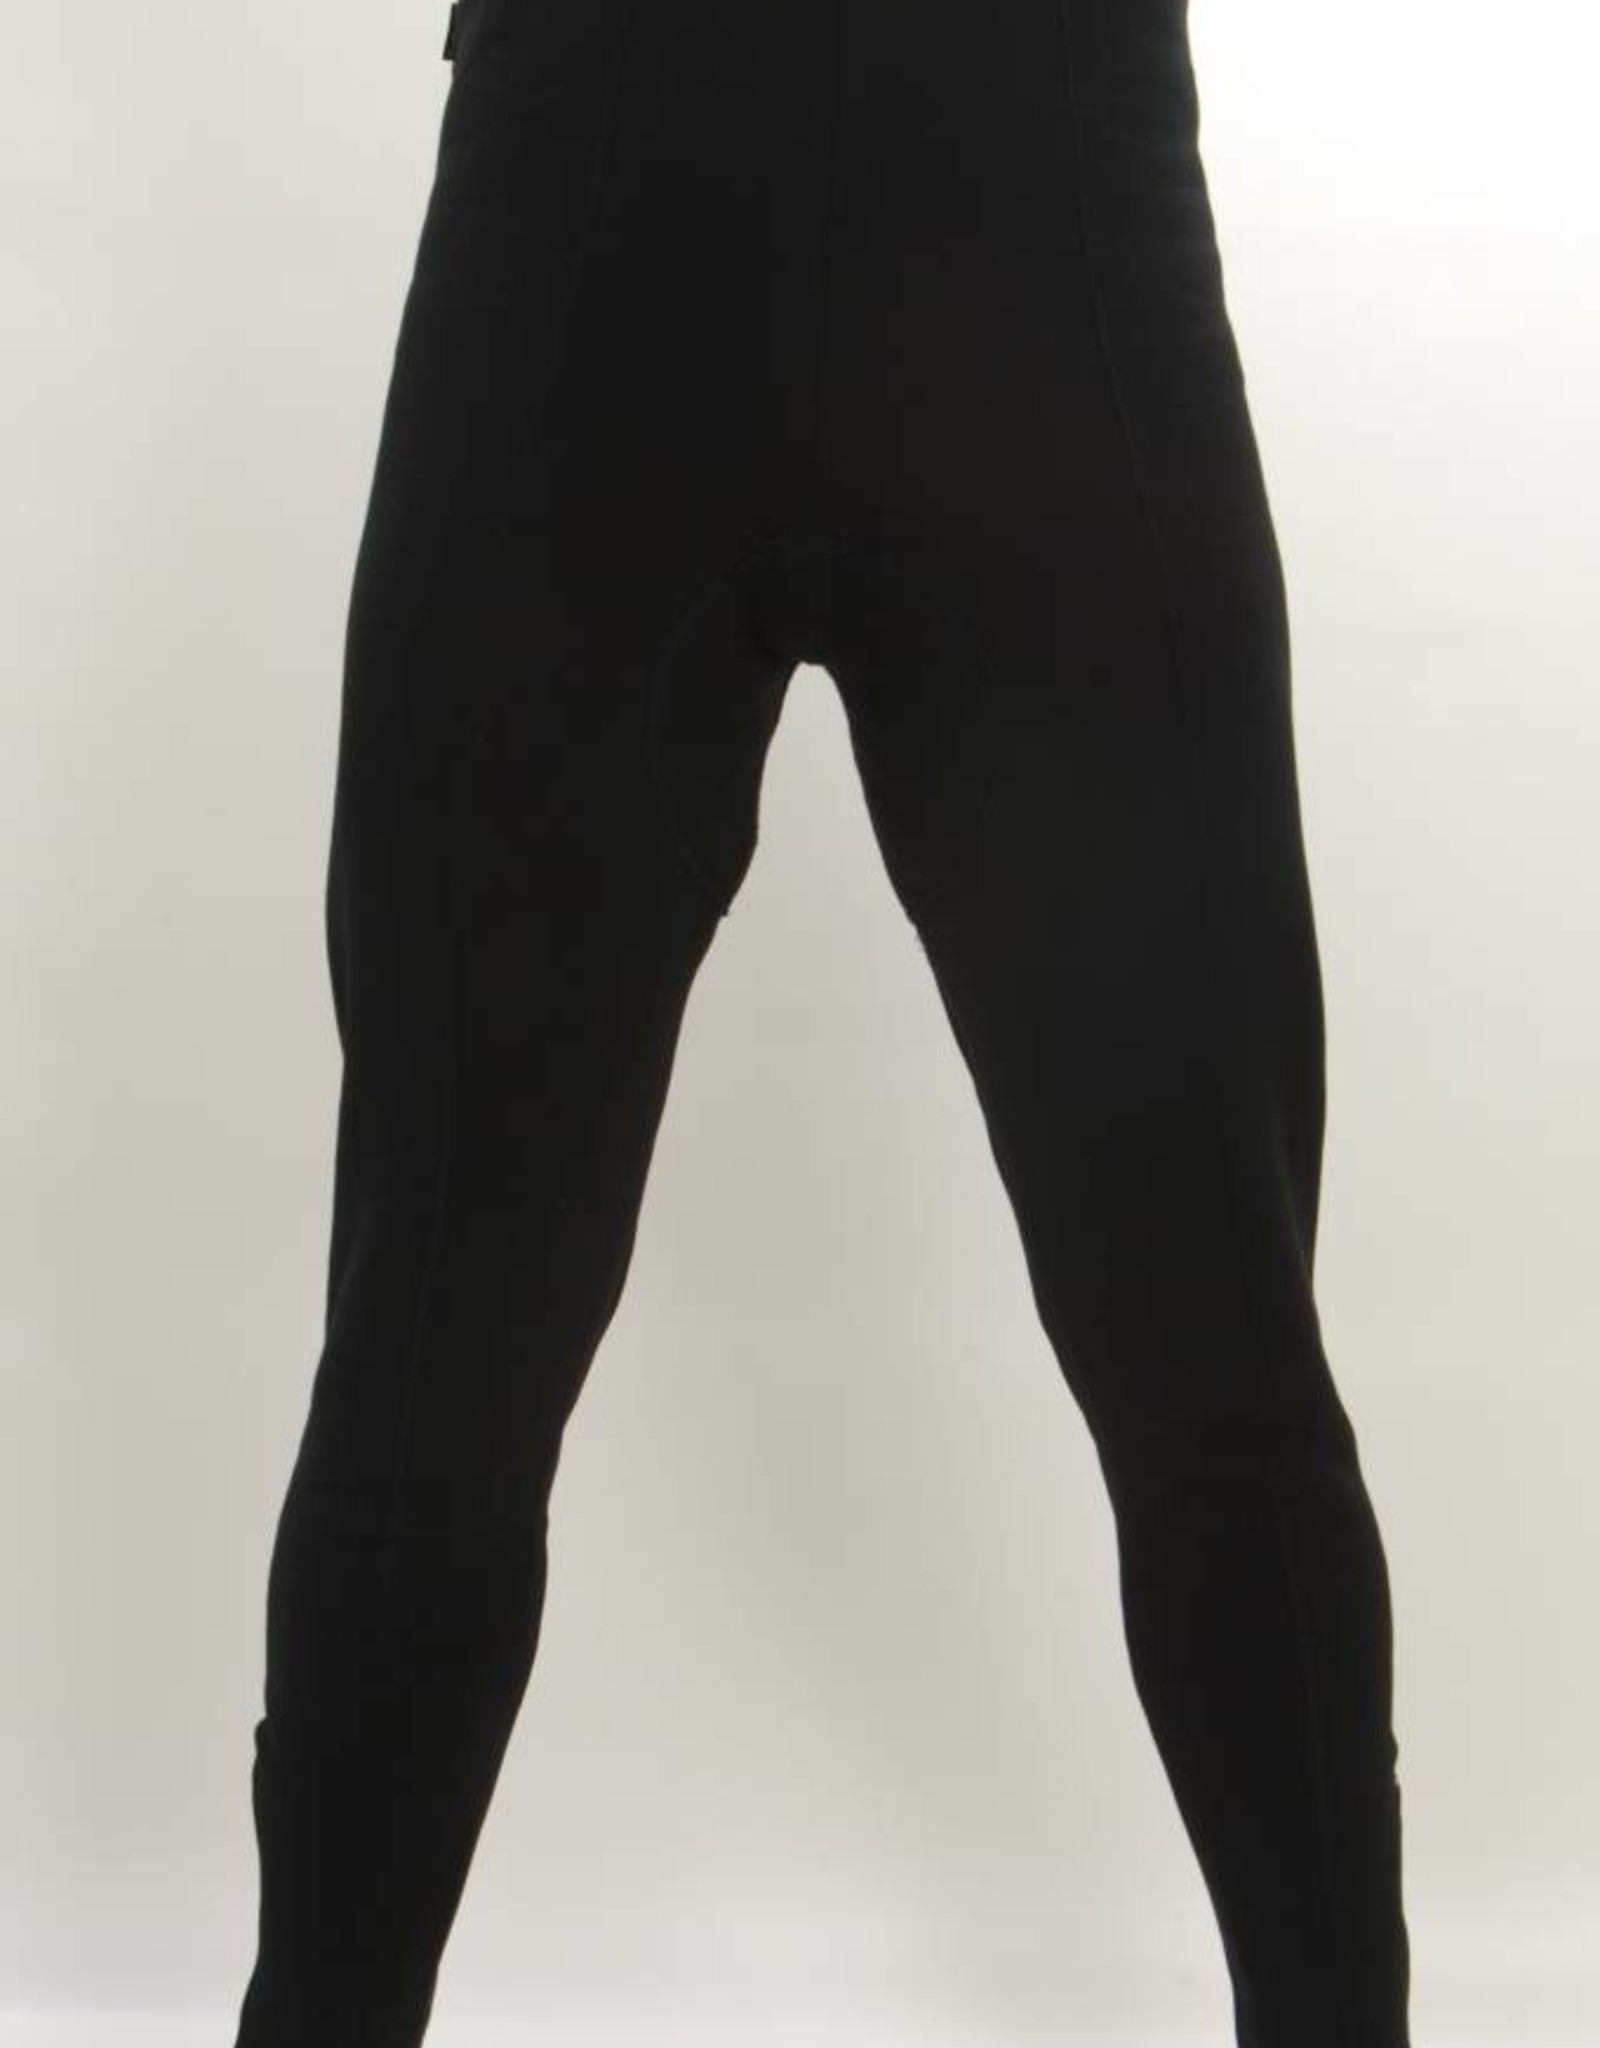 Tudor Cycle Tights with Double seat - Made to Order